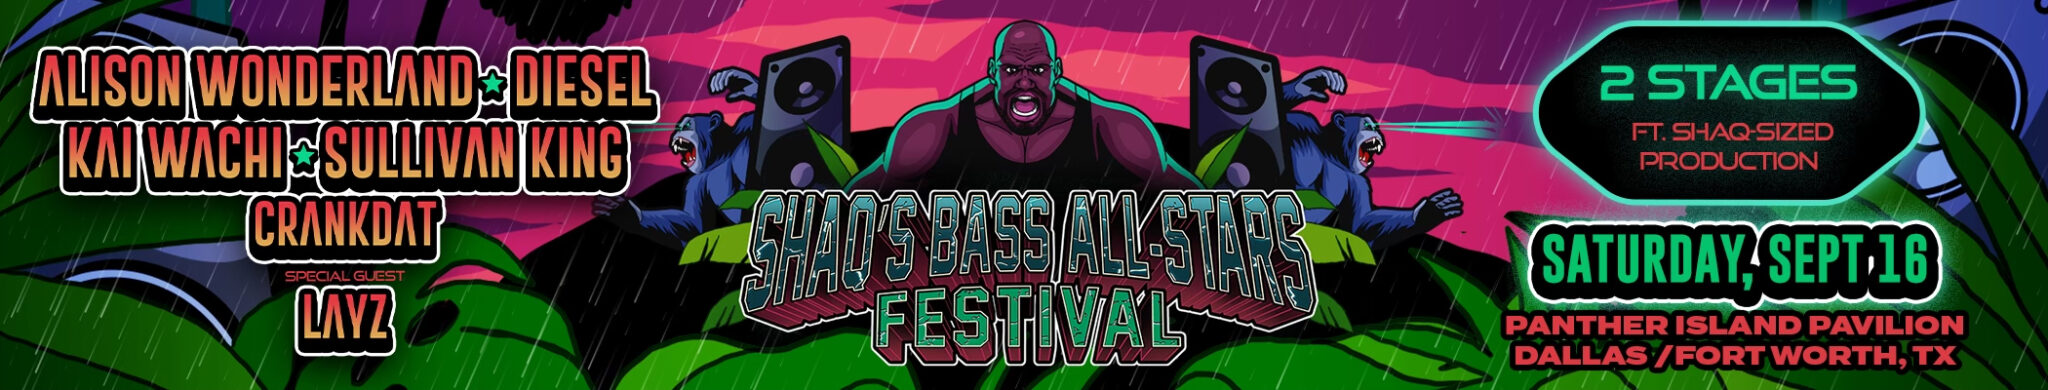 Shaq's Bass All Stars Promo Code, Festival, 2023, Discount Tickets, GA, VIP, General Admission, Panther Island Pavilion, Fort Worth Texas.